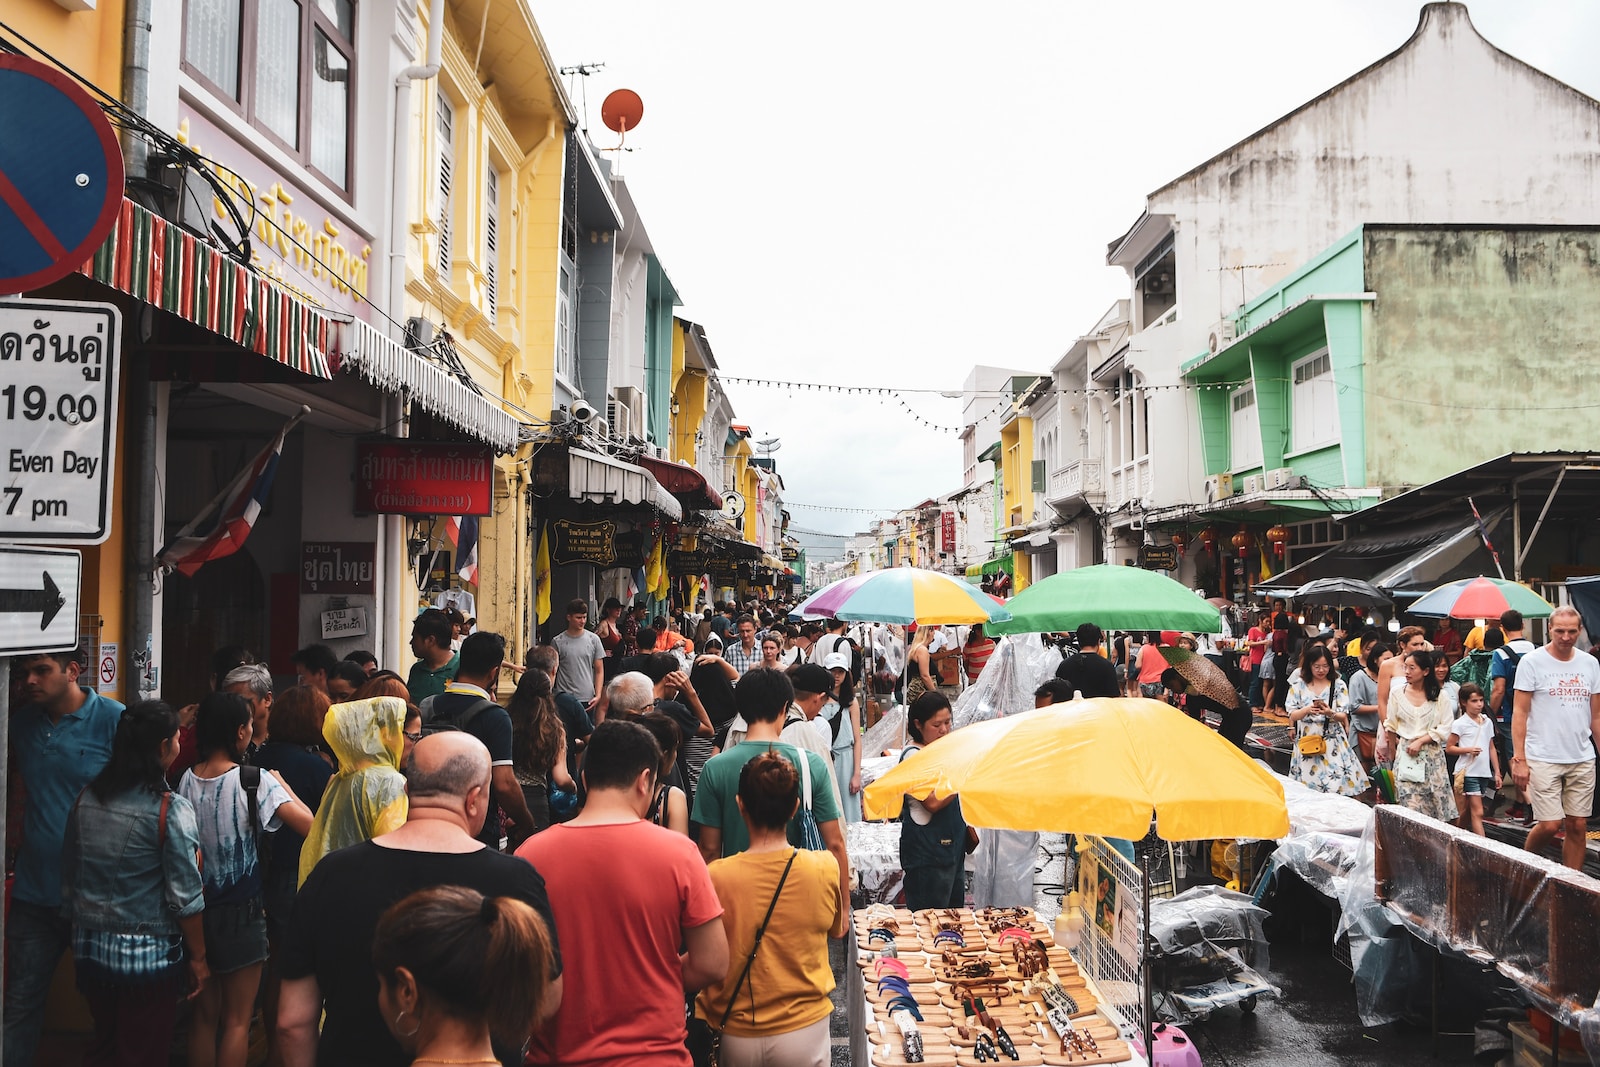 The market takes place every Sunday on Talang Road, one of the oldest and most beautiful streets in the city.